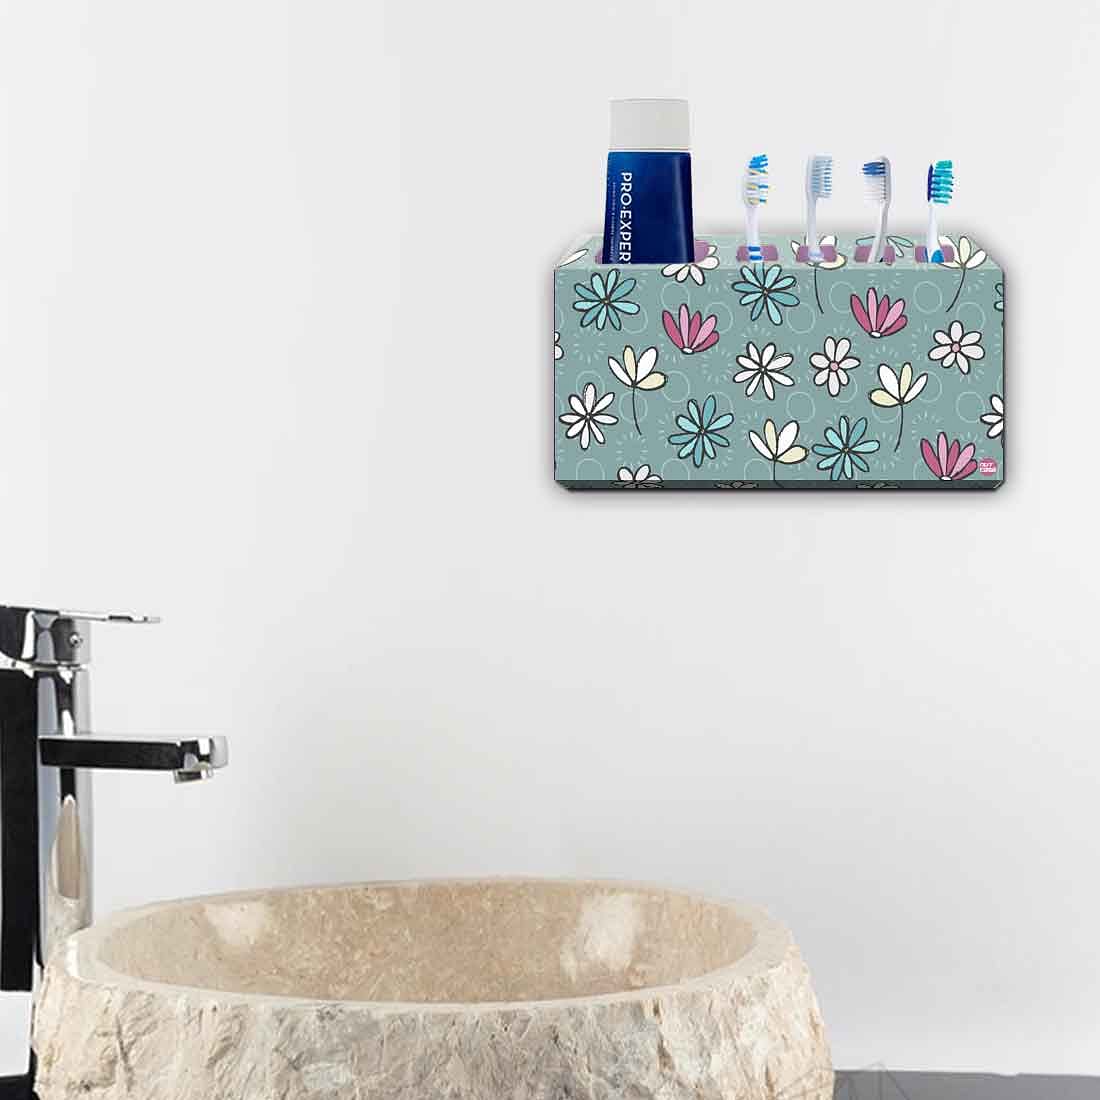 Toothbrush Holder Wall Mounted -Leaves and Petals Nutcase